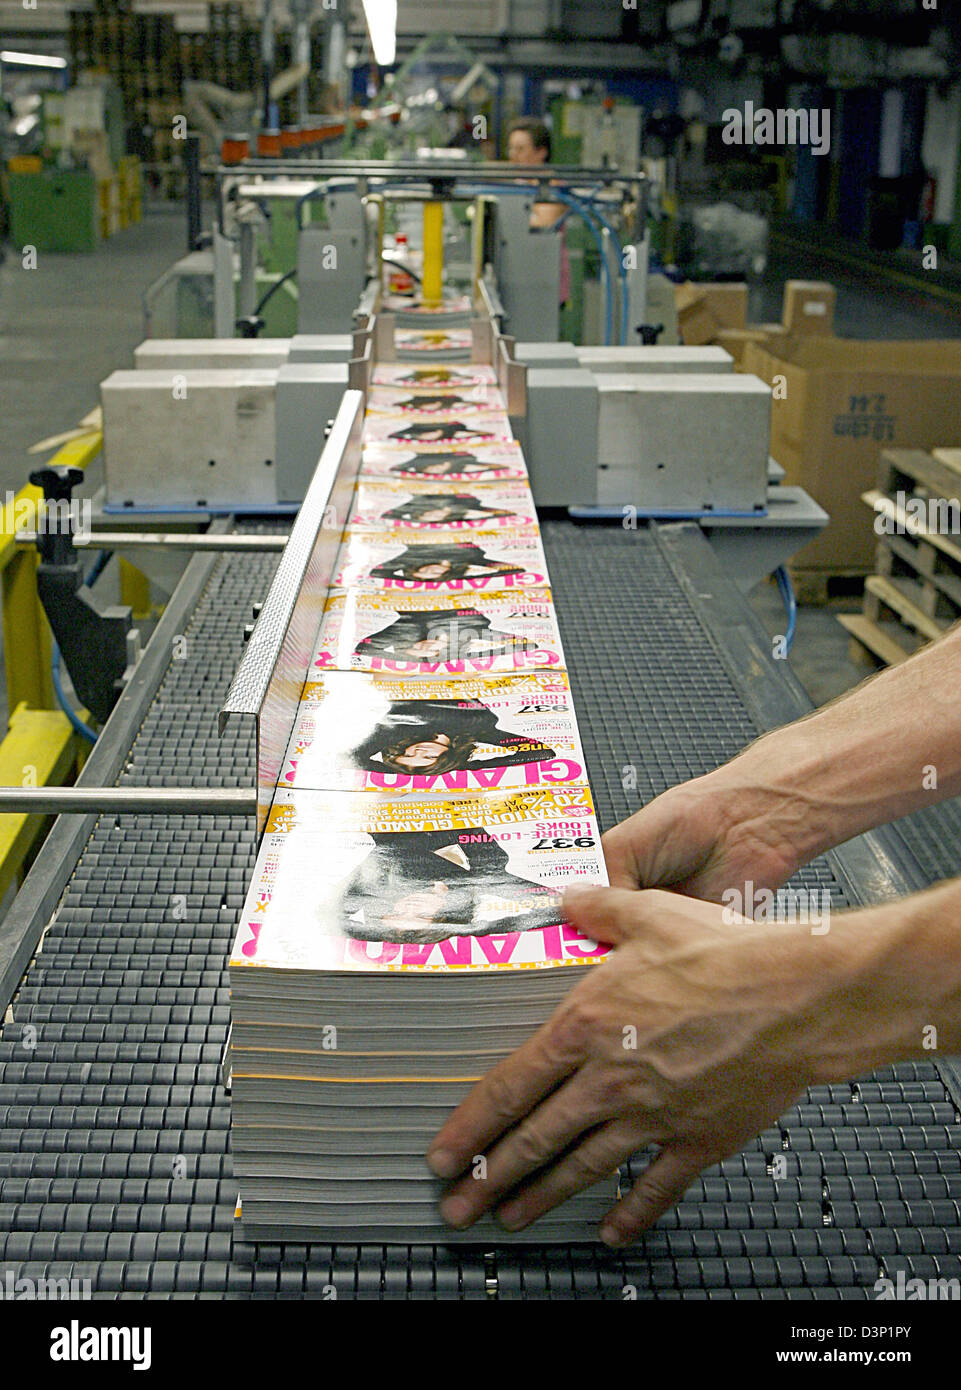 A worker stacks magazines onto a conveyor belt in the printing plant Prinovis in Nuremberg, Germany, 27 June 2006. Prinovis is a joint-venture of publishing companies Bertelsmann, Gruner&Jahr and Springer and one of Europe's biggest rotogravure printing companies. Photo: Daniel Karmann Stock Photo